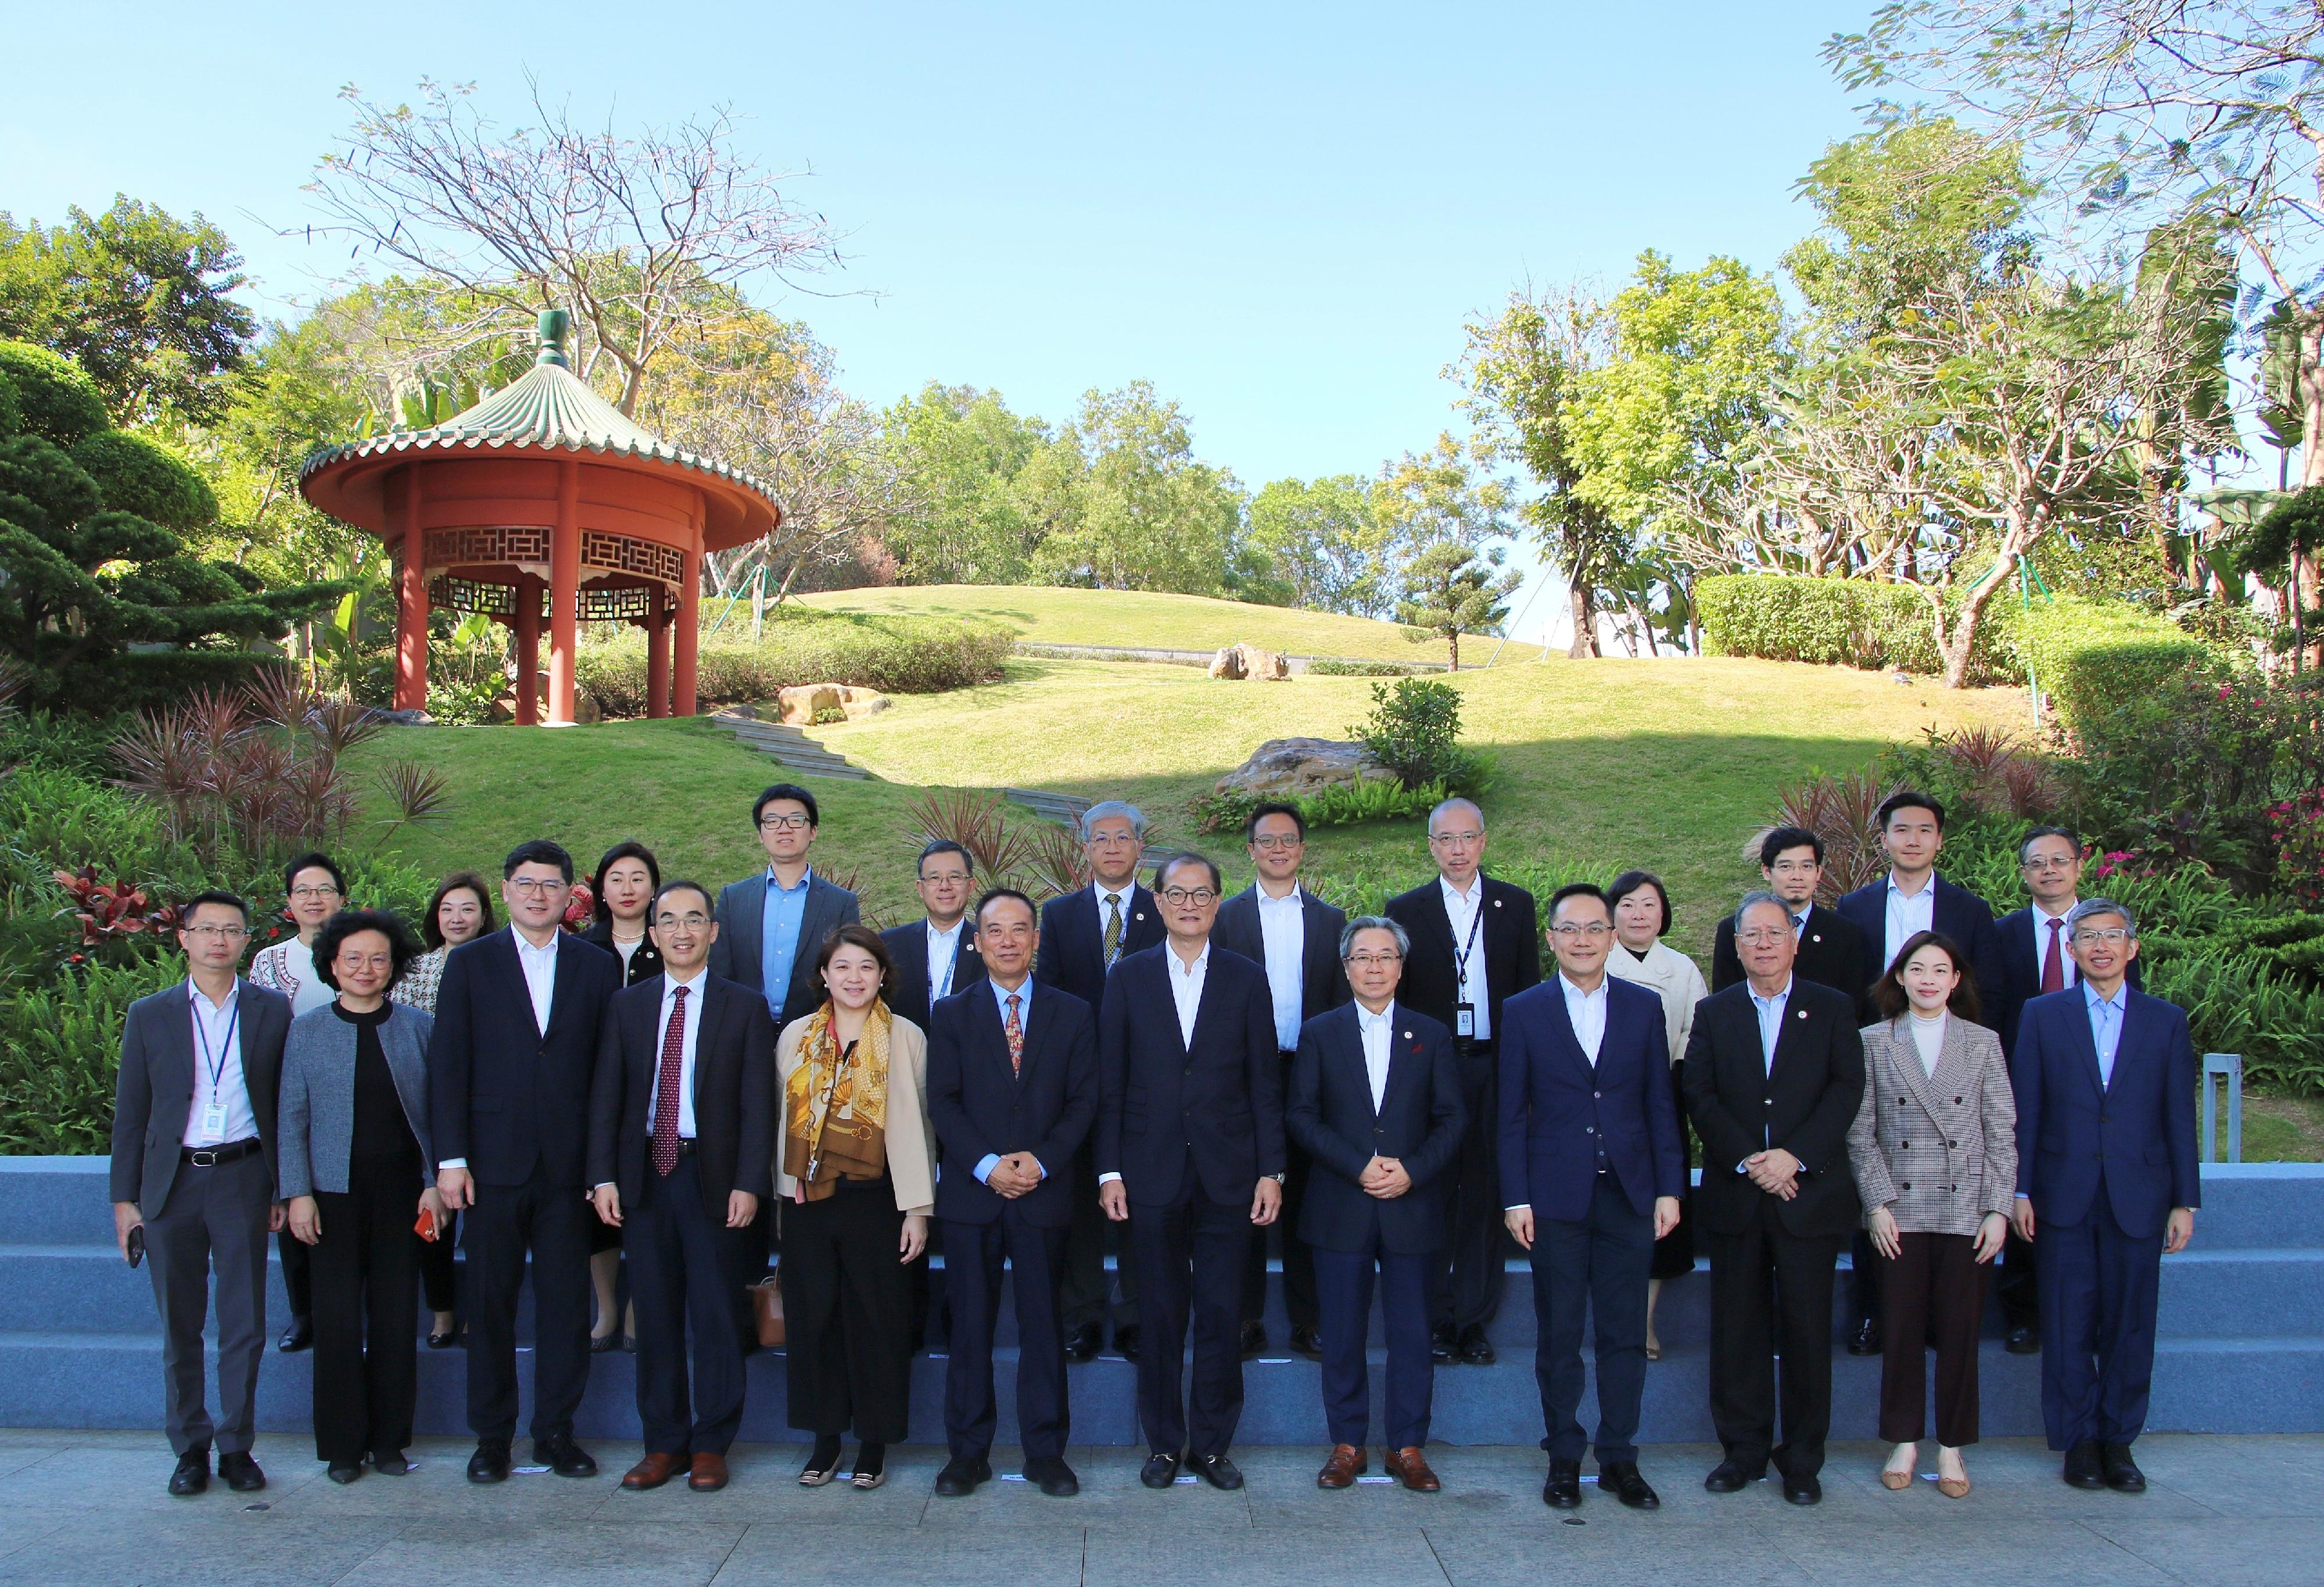 The Secretary for Health, Professor Lo Chung-mau, visited the School of Medicine of the Chinese University of Hong Kong, Shenzhen today (January 19). Photo shows Professor Lo (front row, sixth right); the President of the Chinese University of Hong Kong, Shenzhen, Professor Xu Yangsheng (front row, sixth left); the Founding Dean of the School of Medicine, Professor Davy Cheng (front row, fifth right); the Under Secretary for Health, Dr Libby Lee (front row, fifth left); the Director of Health, Dr Ronald Lam (front row, fourth right); the Chief Executive of the Hospital Authority, Dr Tony Ko (front row, third left), and other staff members.